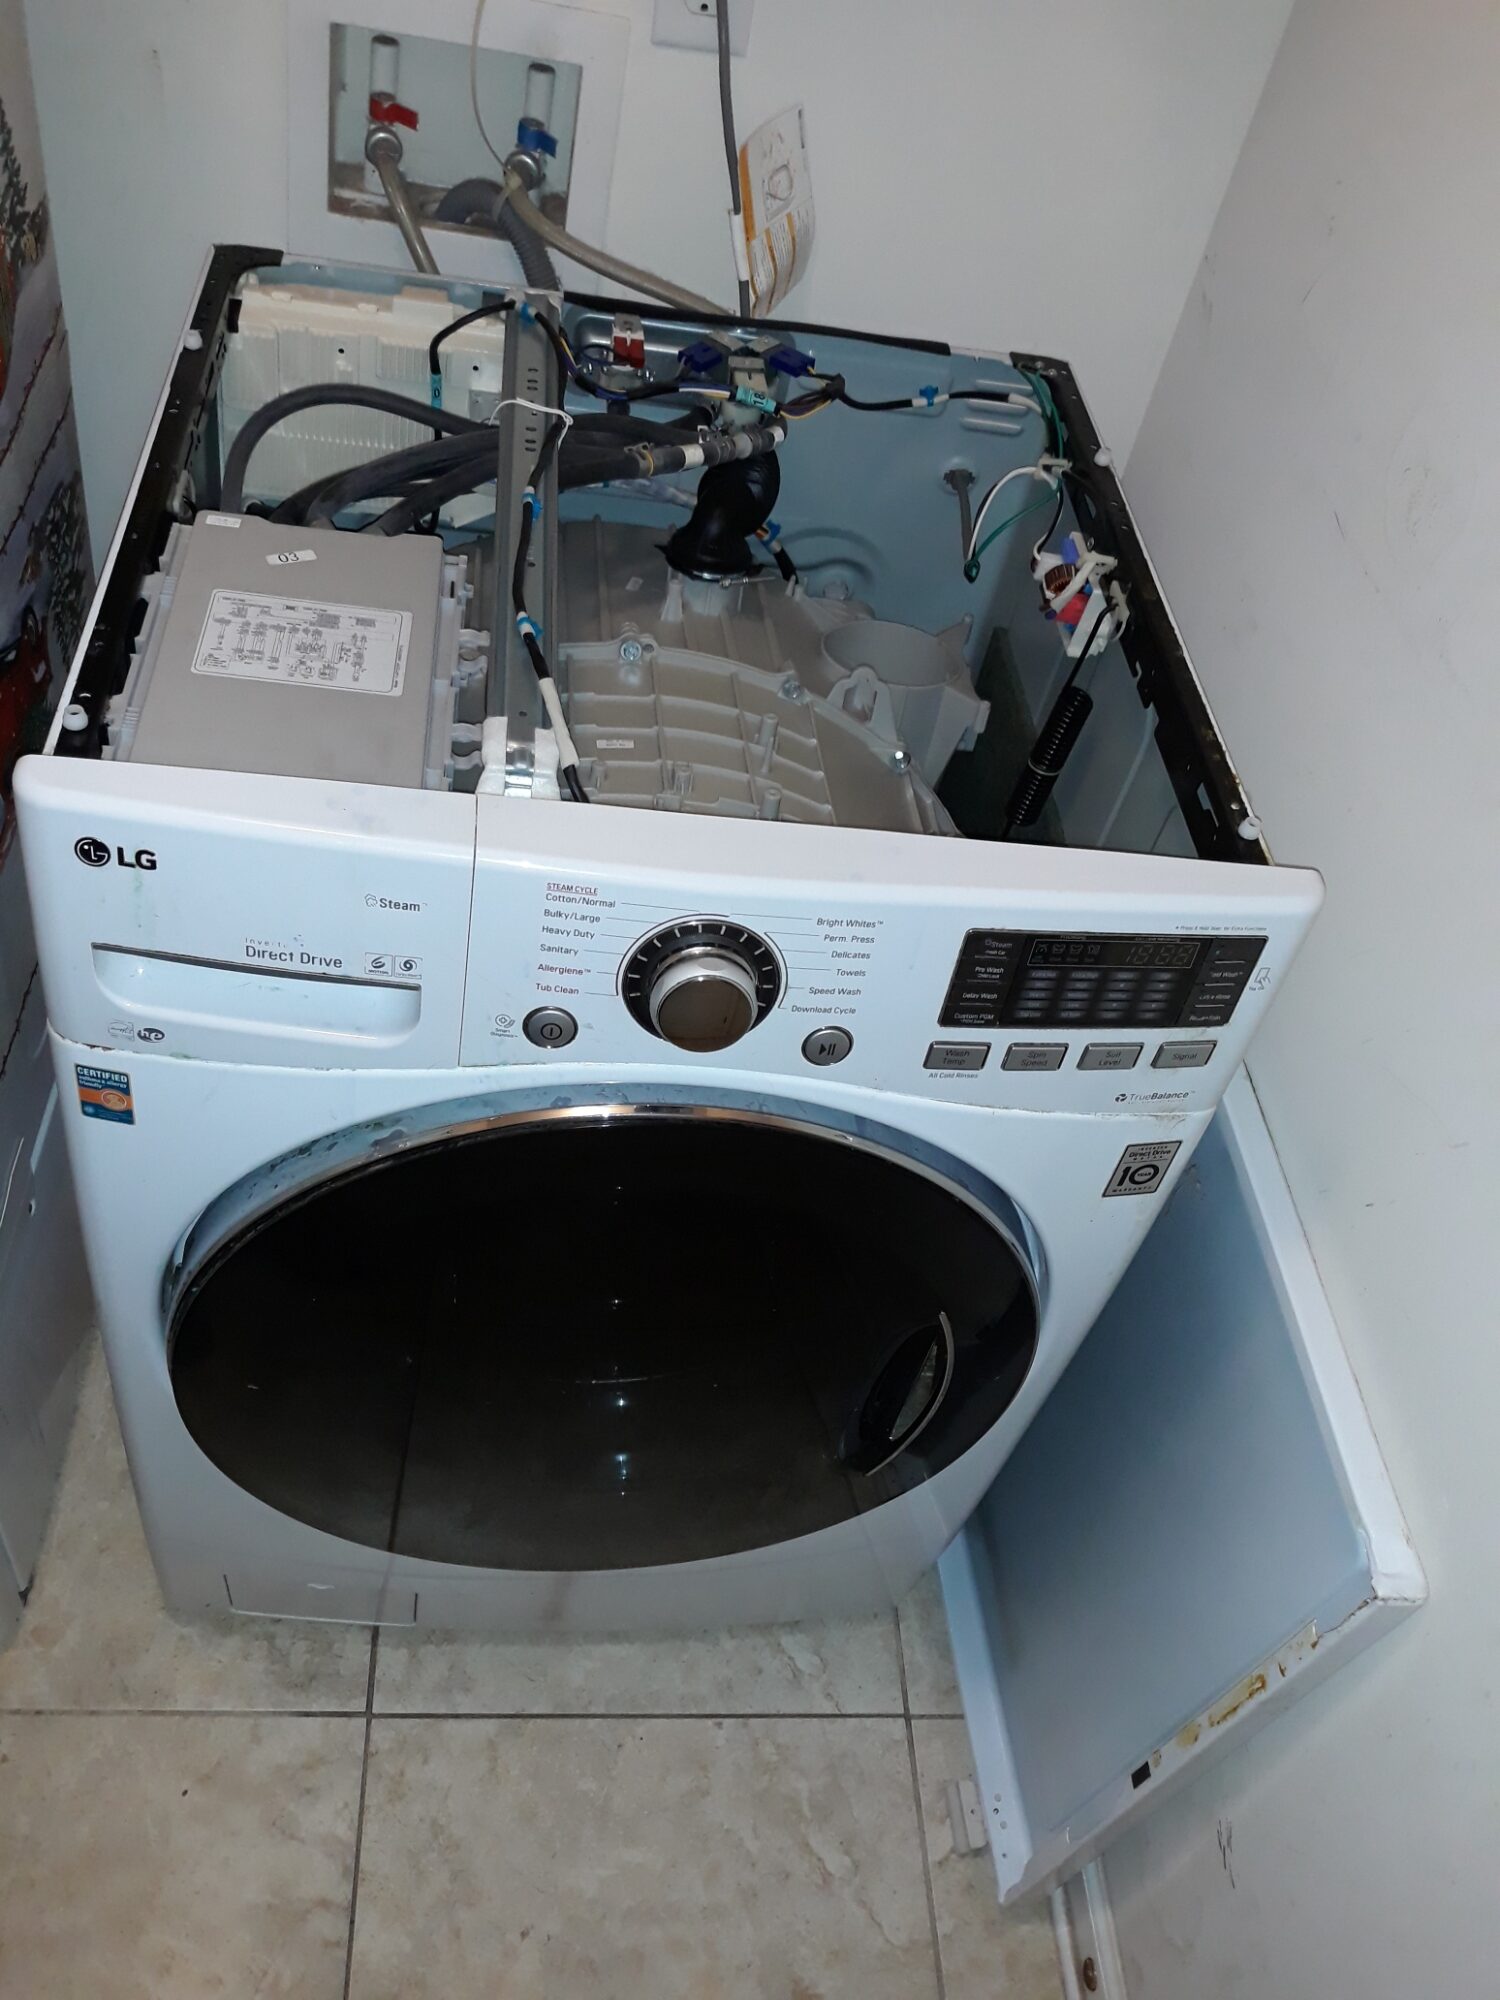 appliance repair washing machine repair require replacement of the drive motor assembly and main control board pearl st mascotte fl 34753